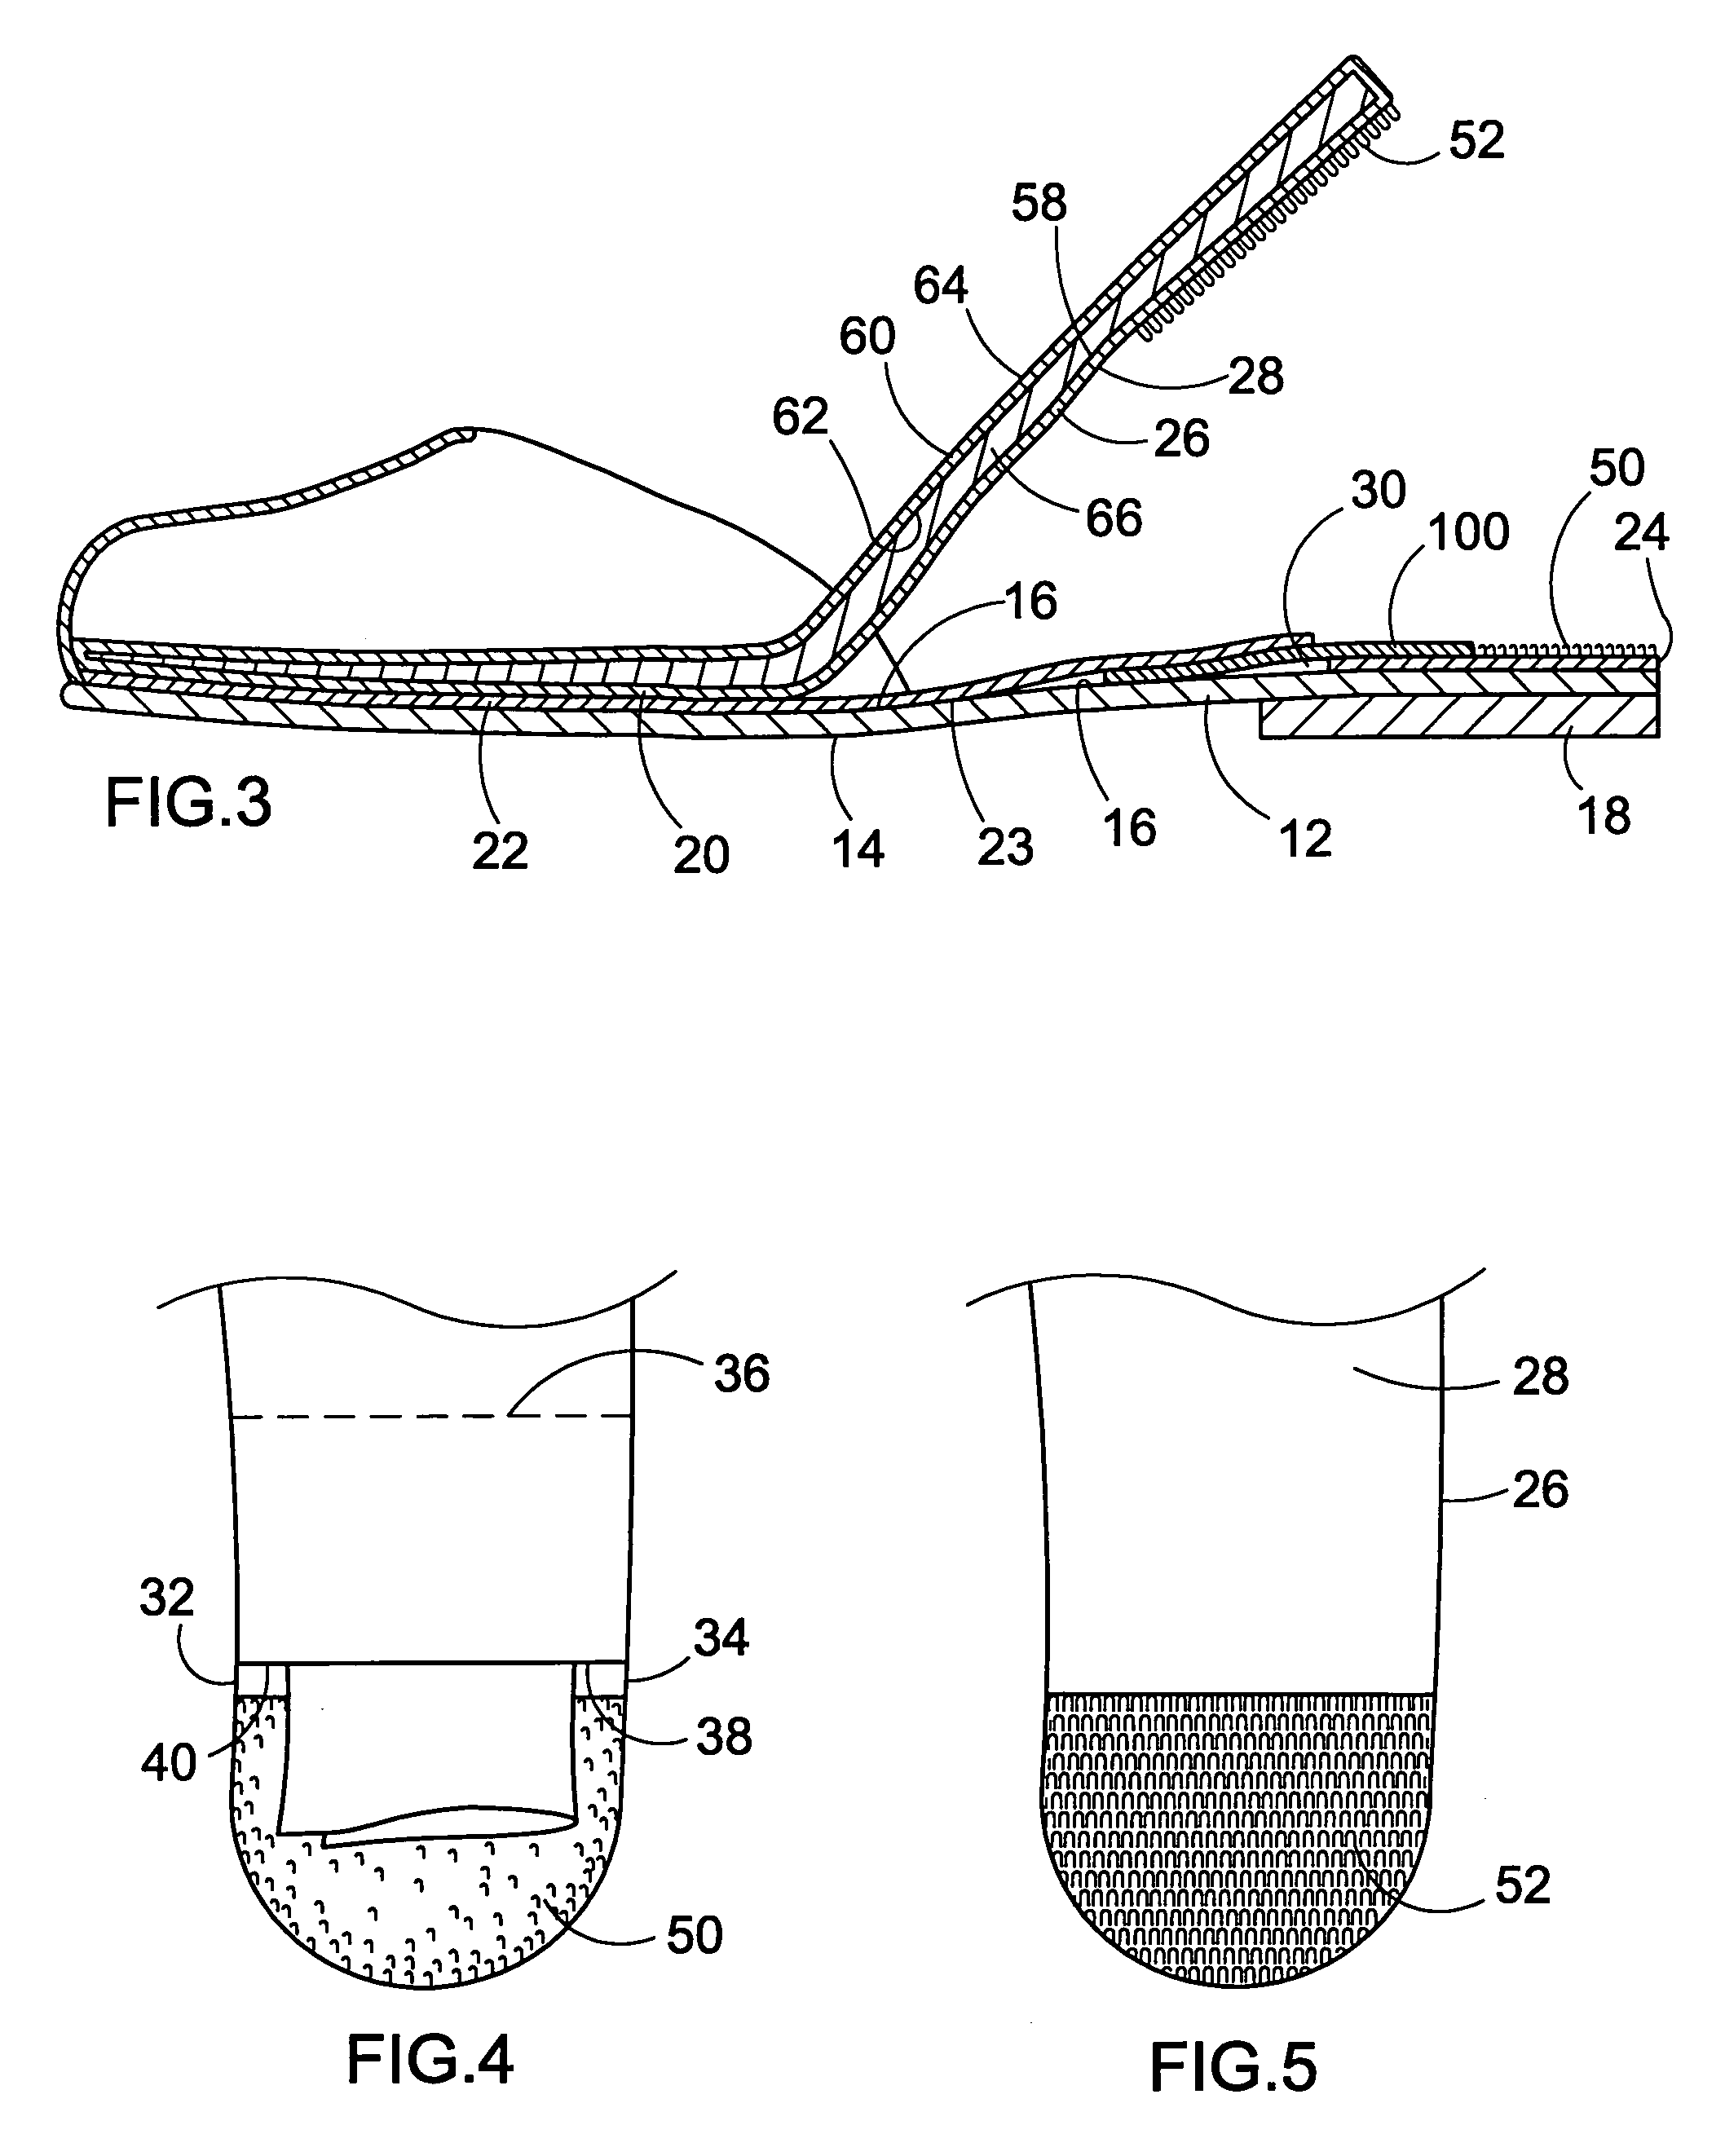 Shoe with concealed compartment for retaining items